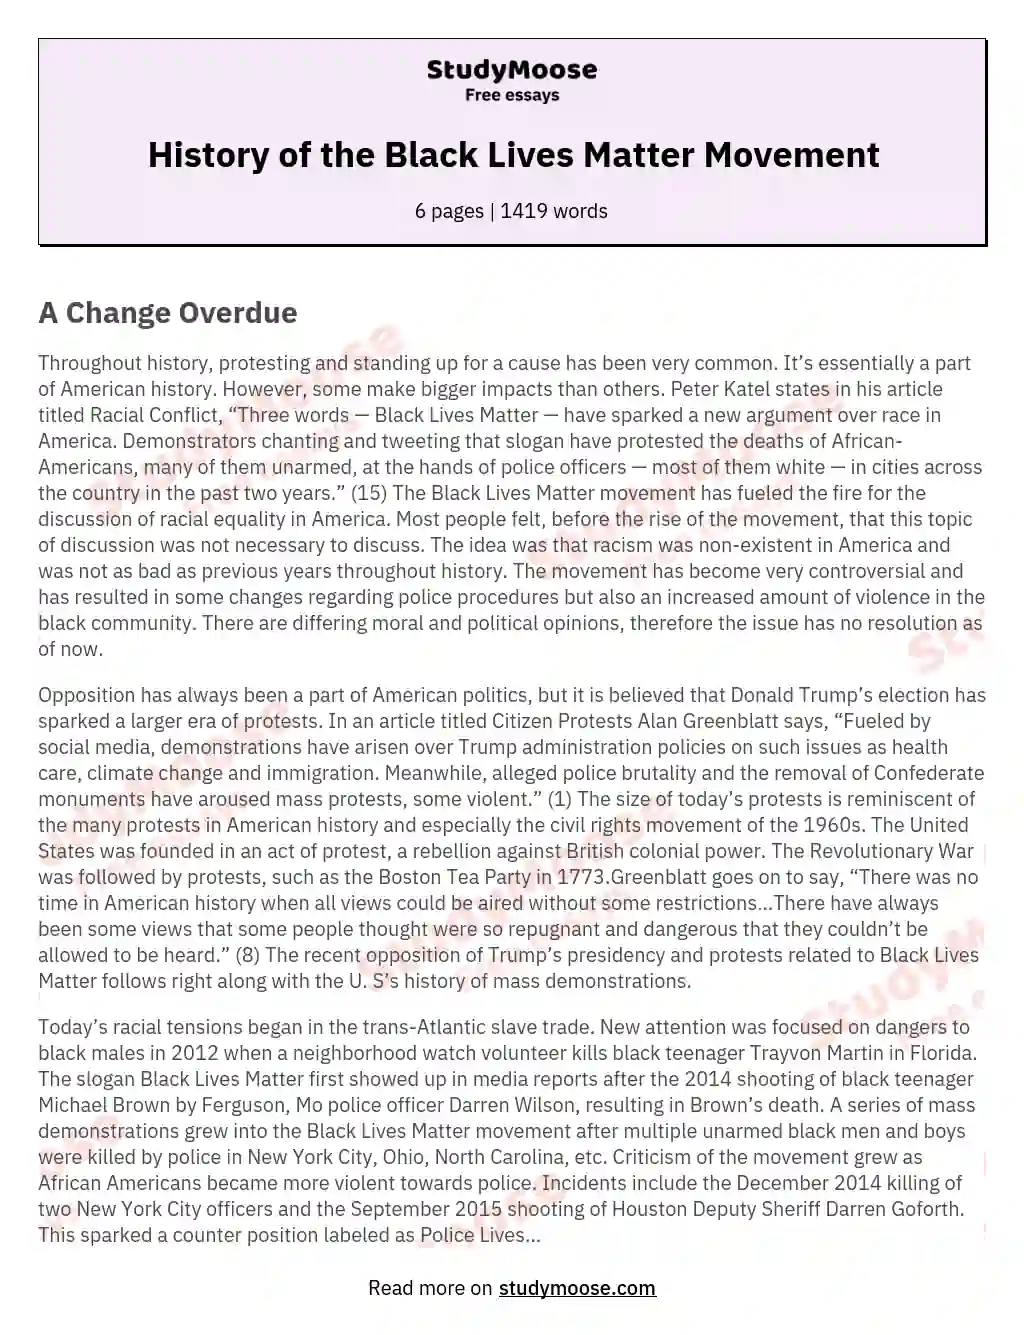 History of the Black Lives Matter Movement essay